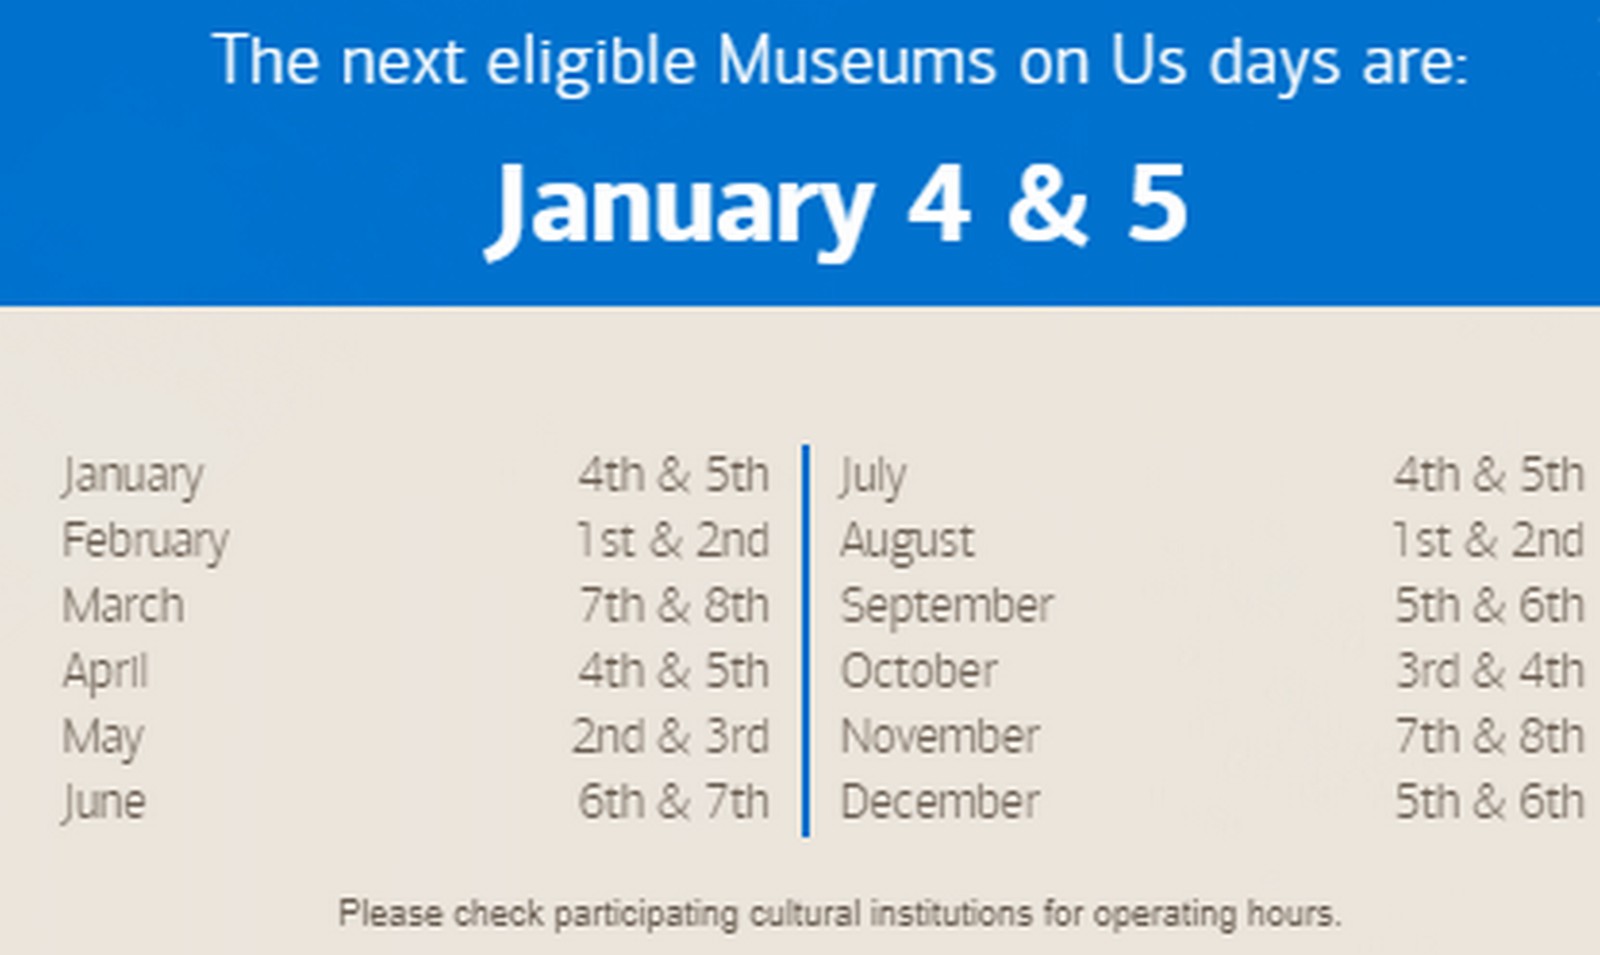 Bank of America Free Museums 2020 Dates, Locations & Eligibility